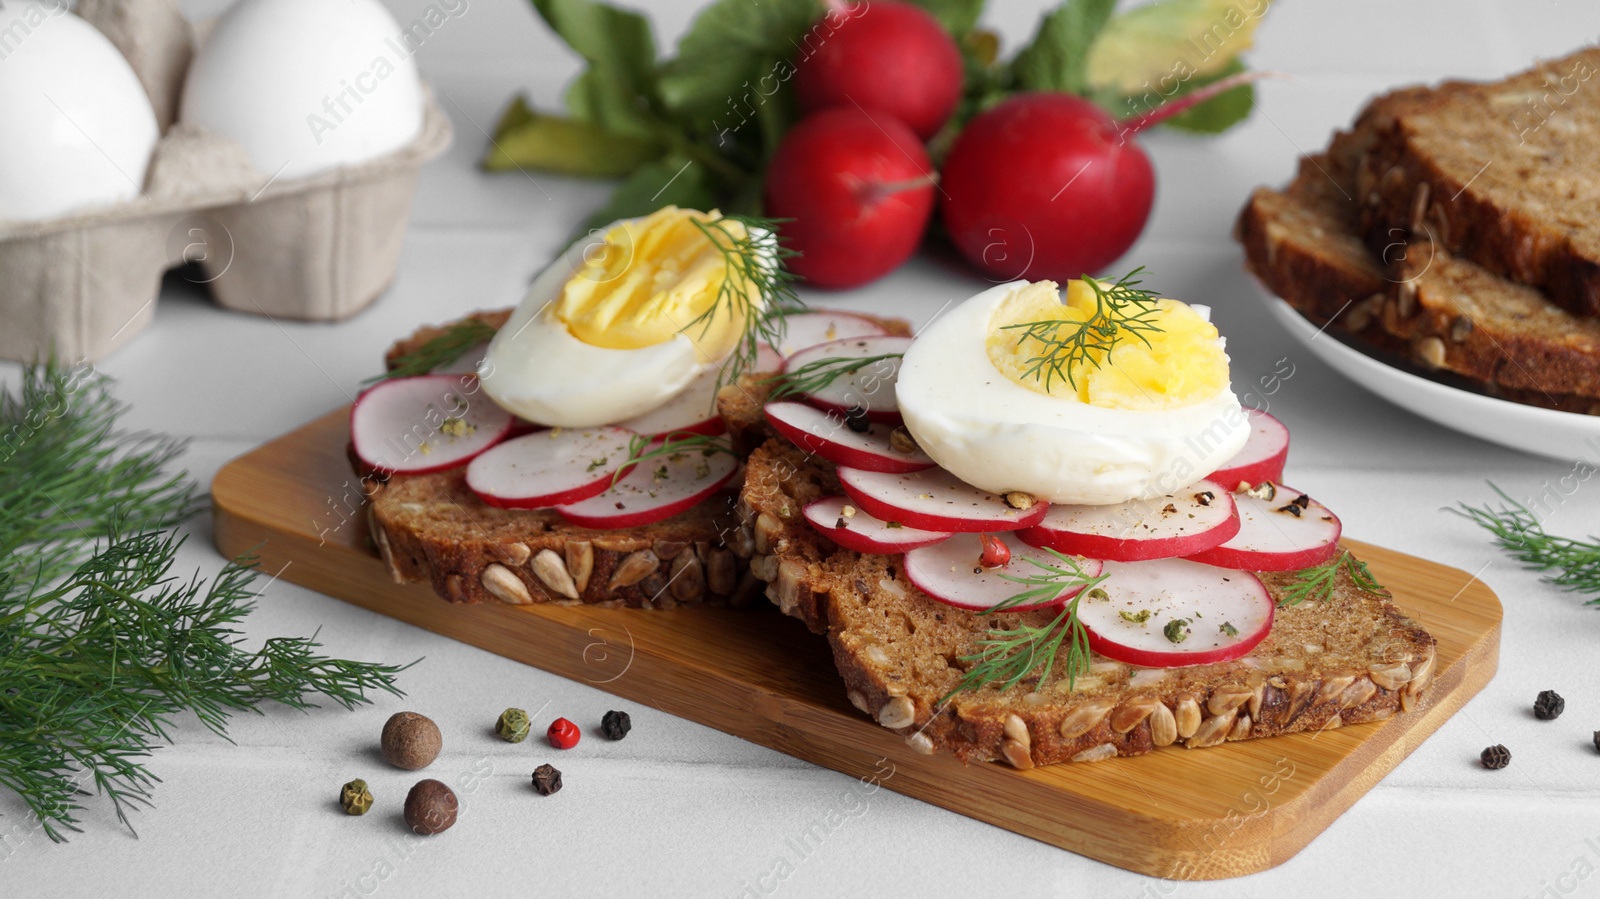 Photo of Tasty sandwiches with boiled egg, radish and ingredients on white tiled table